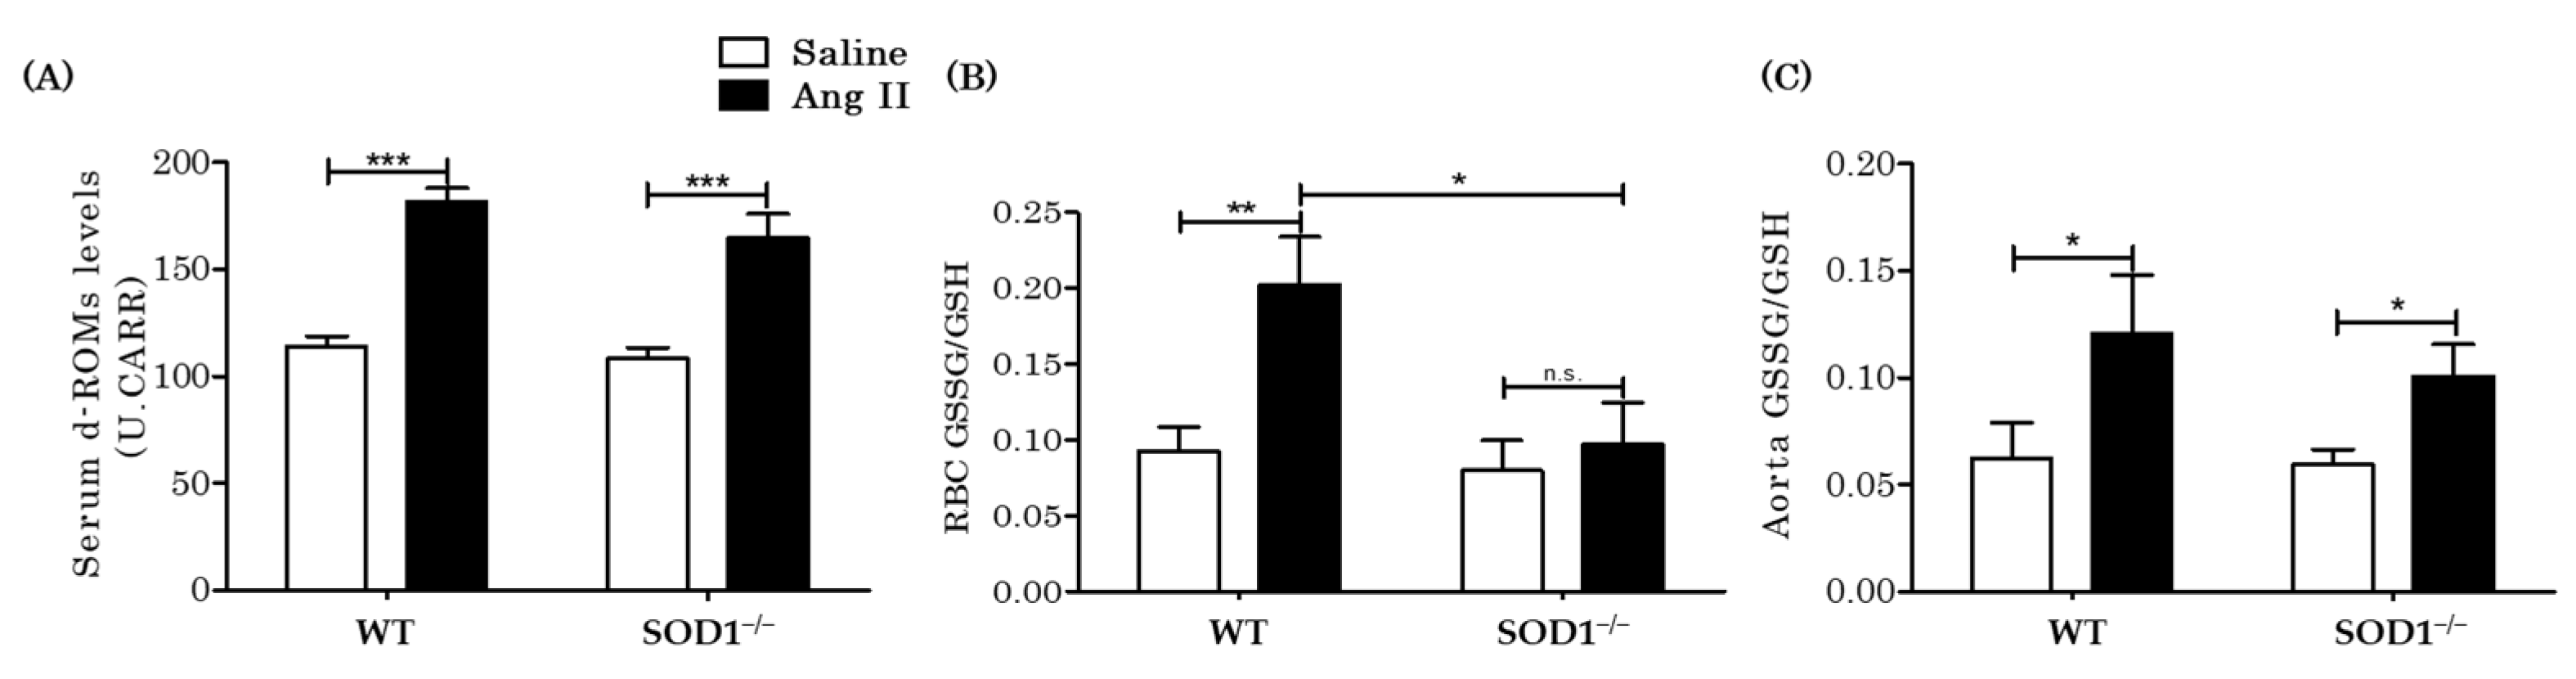 Antioxidants Free Full Text Deletion Of Superoxide Dismutase 1 Blunted Inflammatory Aortic Remodeling In Hypertensive Mice Under Angiotensin Ii Infusion Html